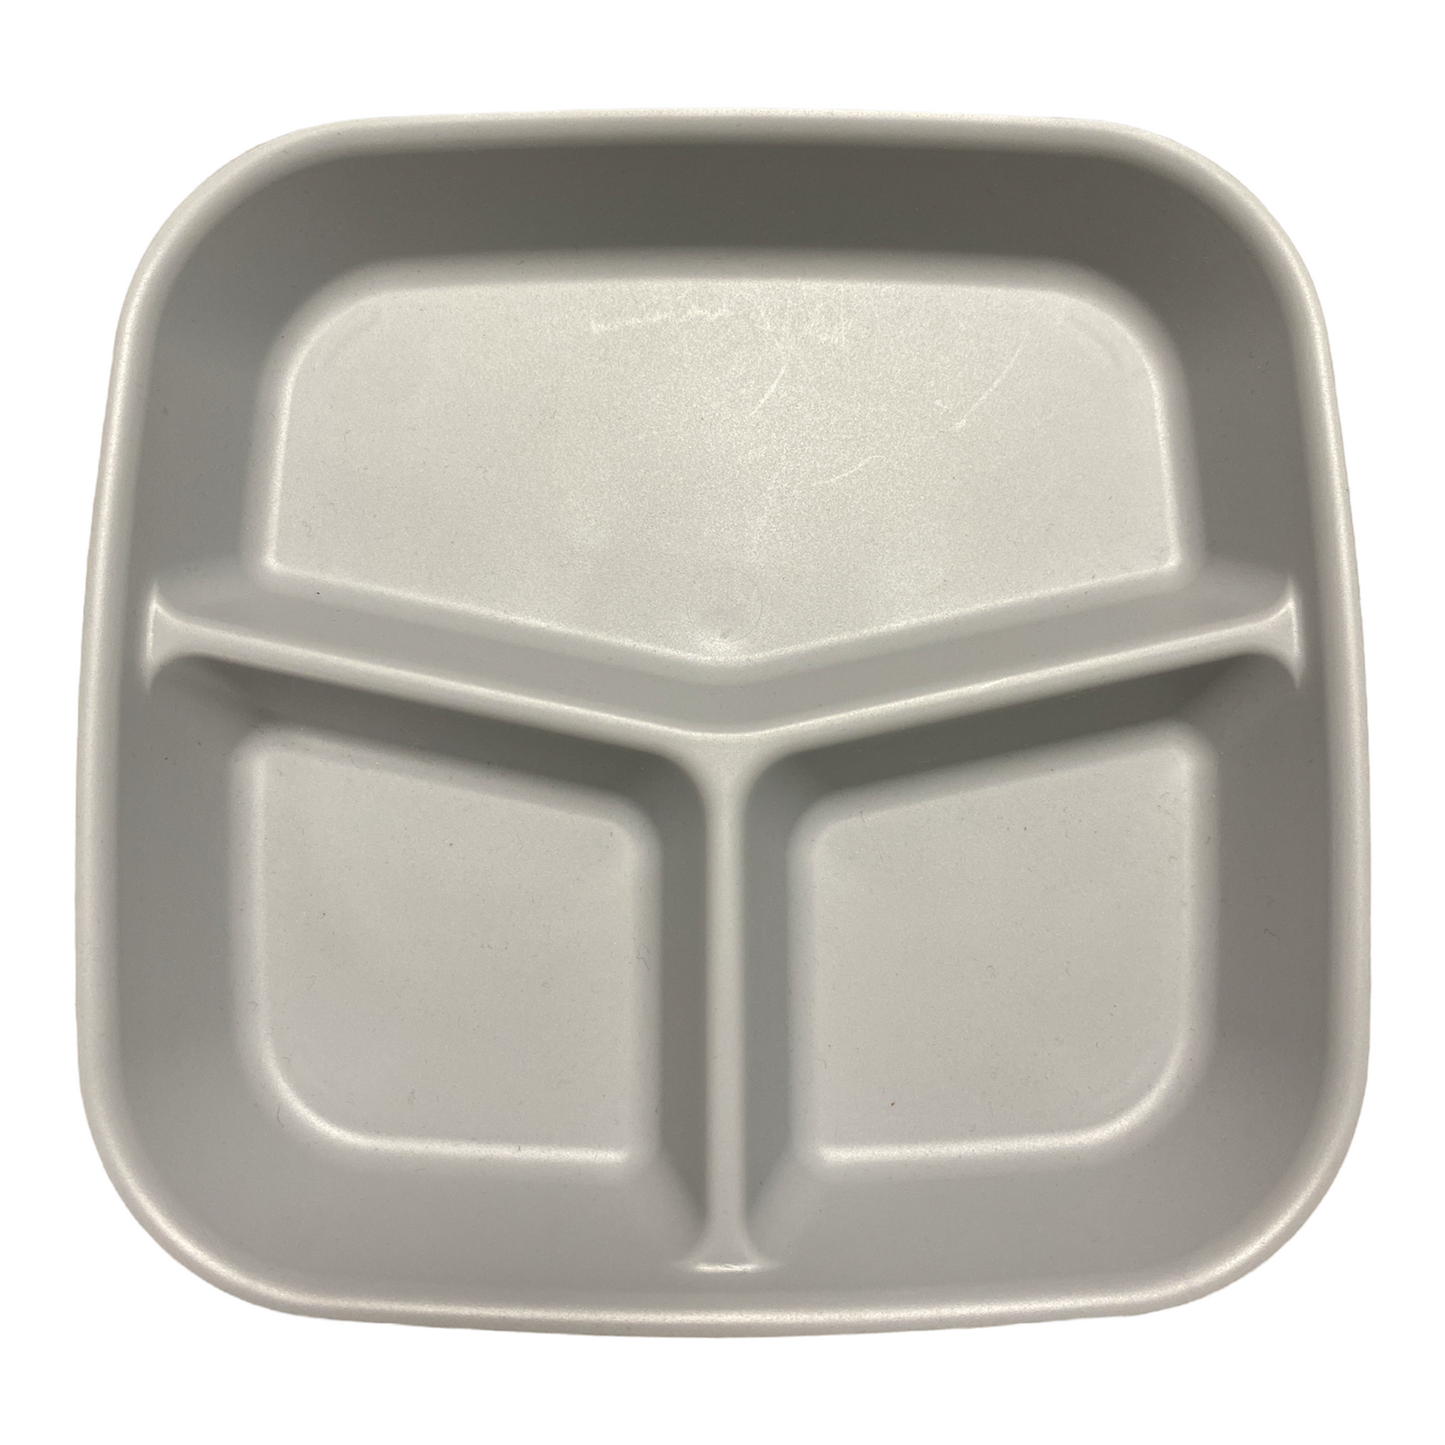 3 compartment plates for toddlers